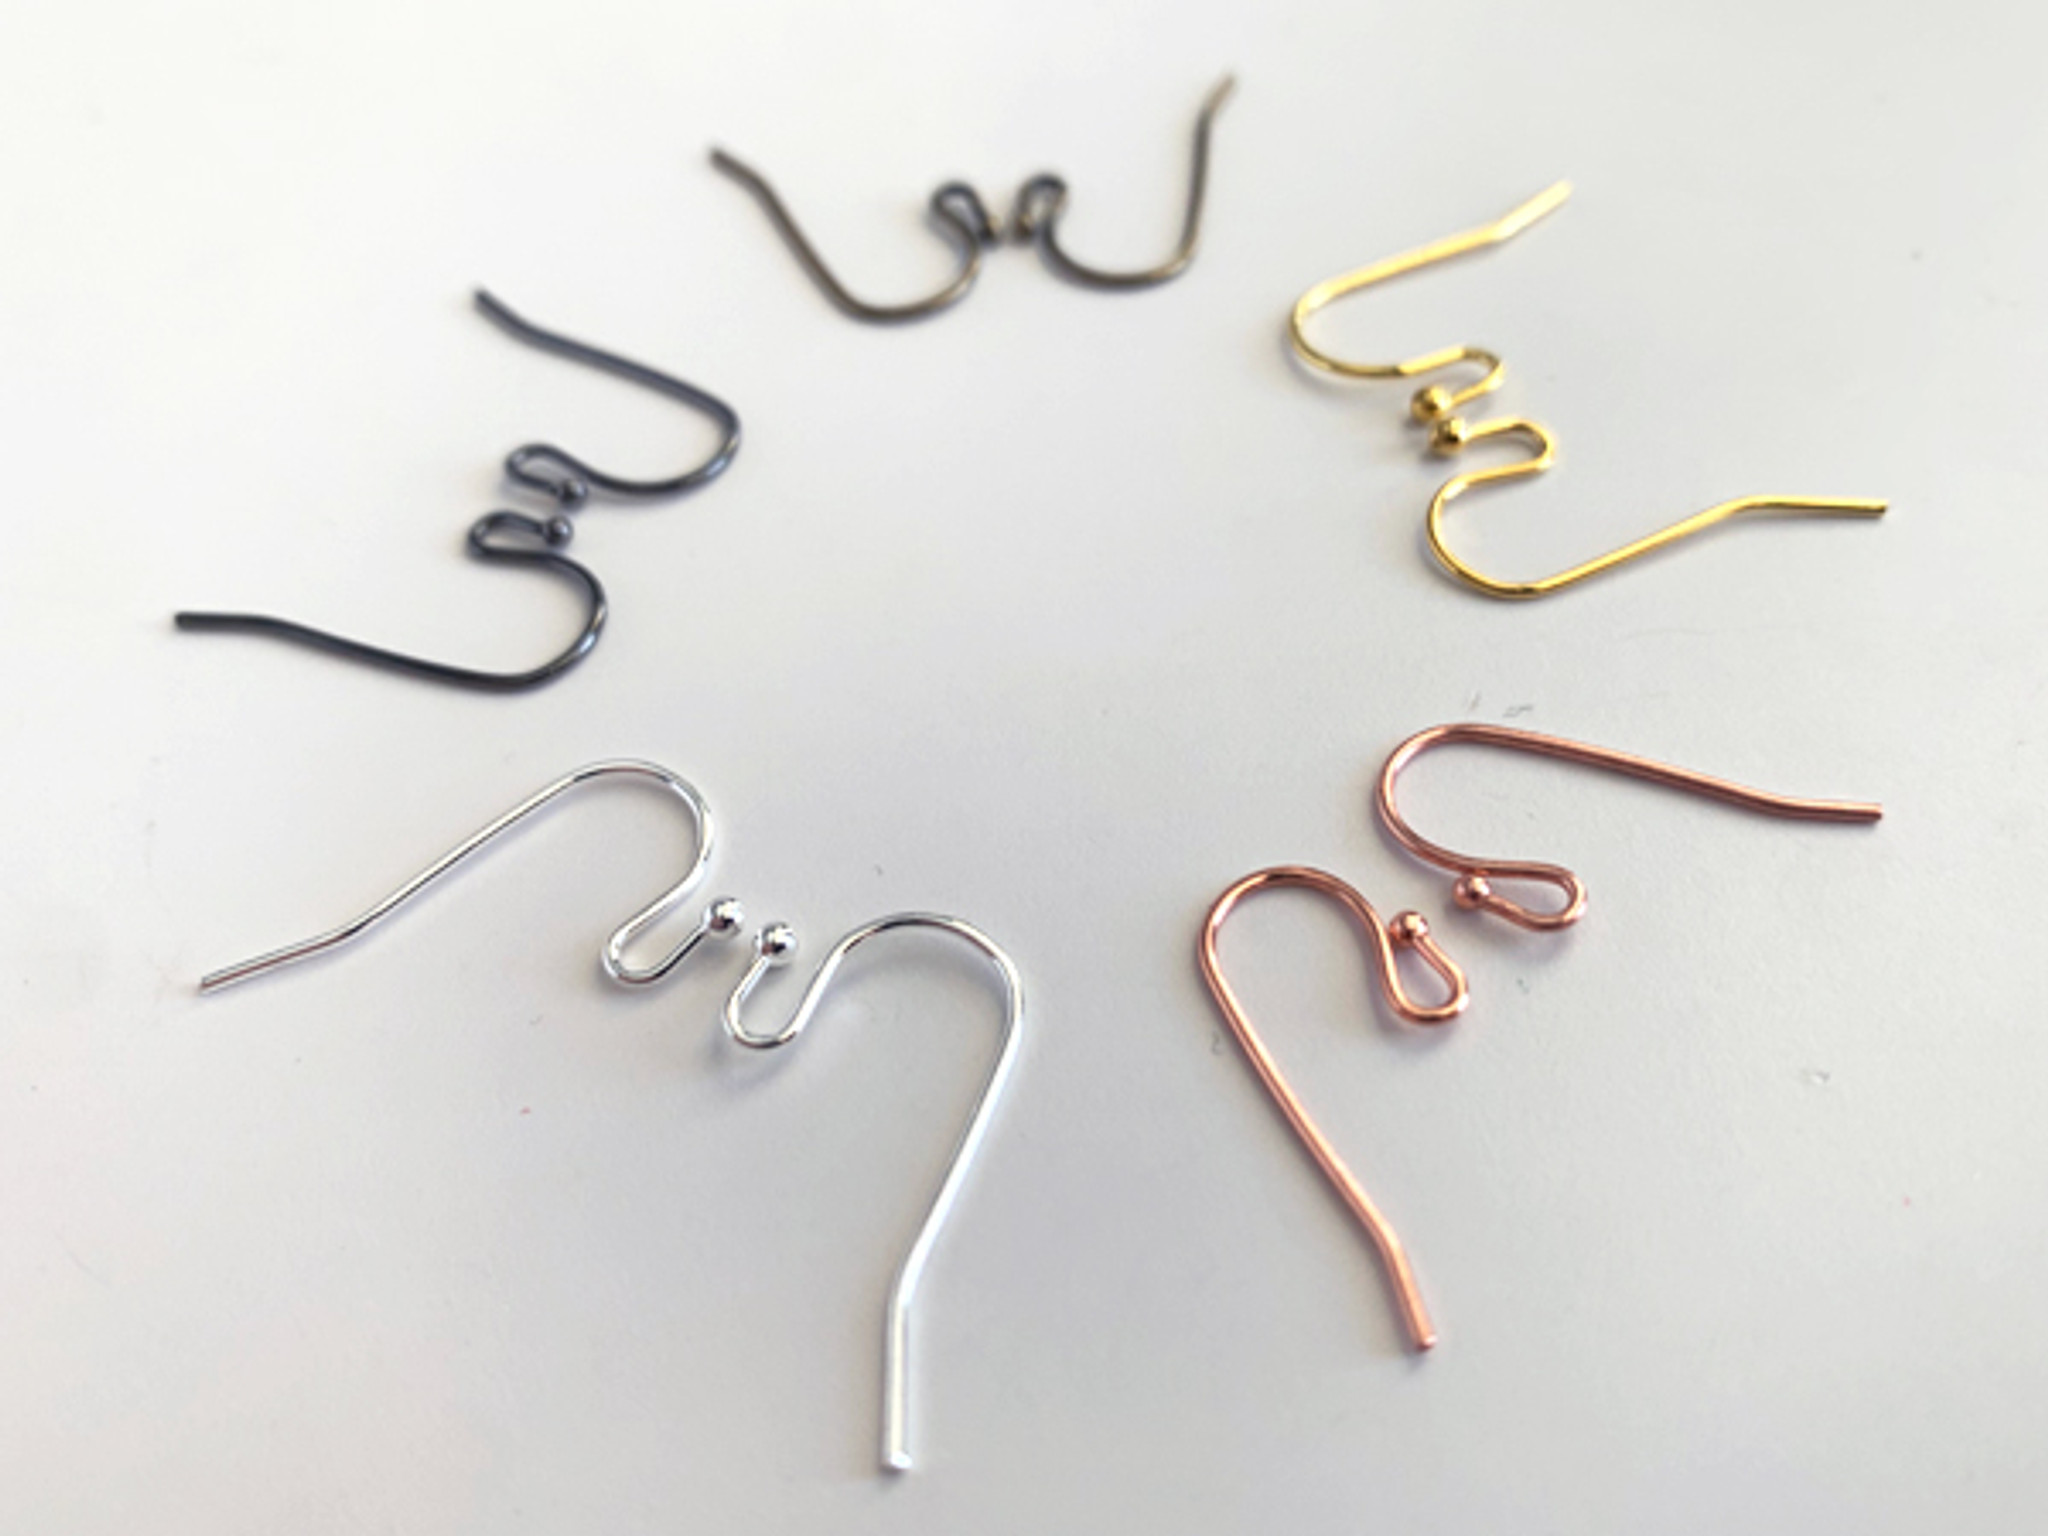 22 Gauge Assorted Metal Ear Wires With Ball End